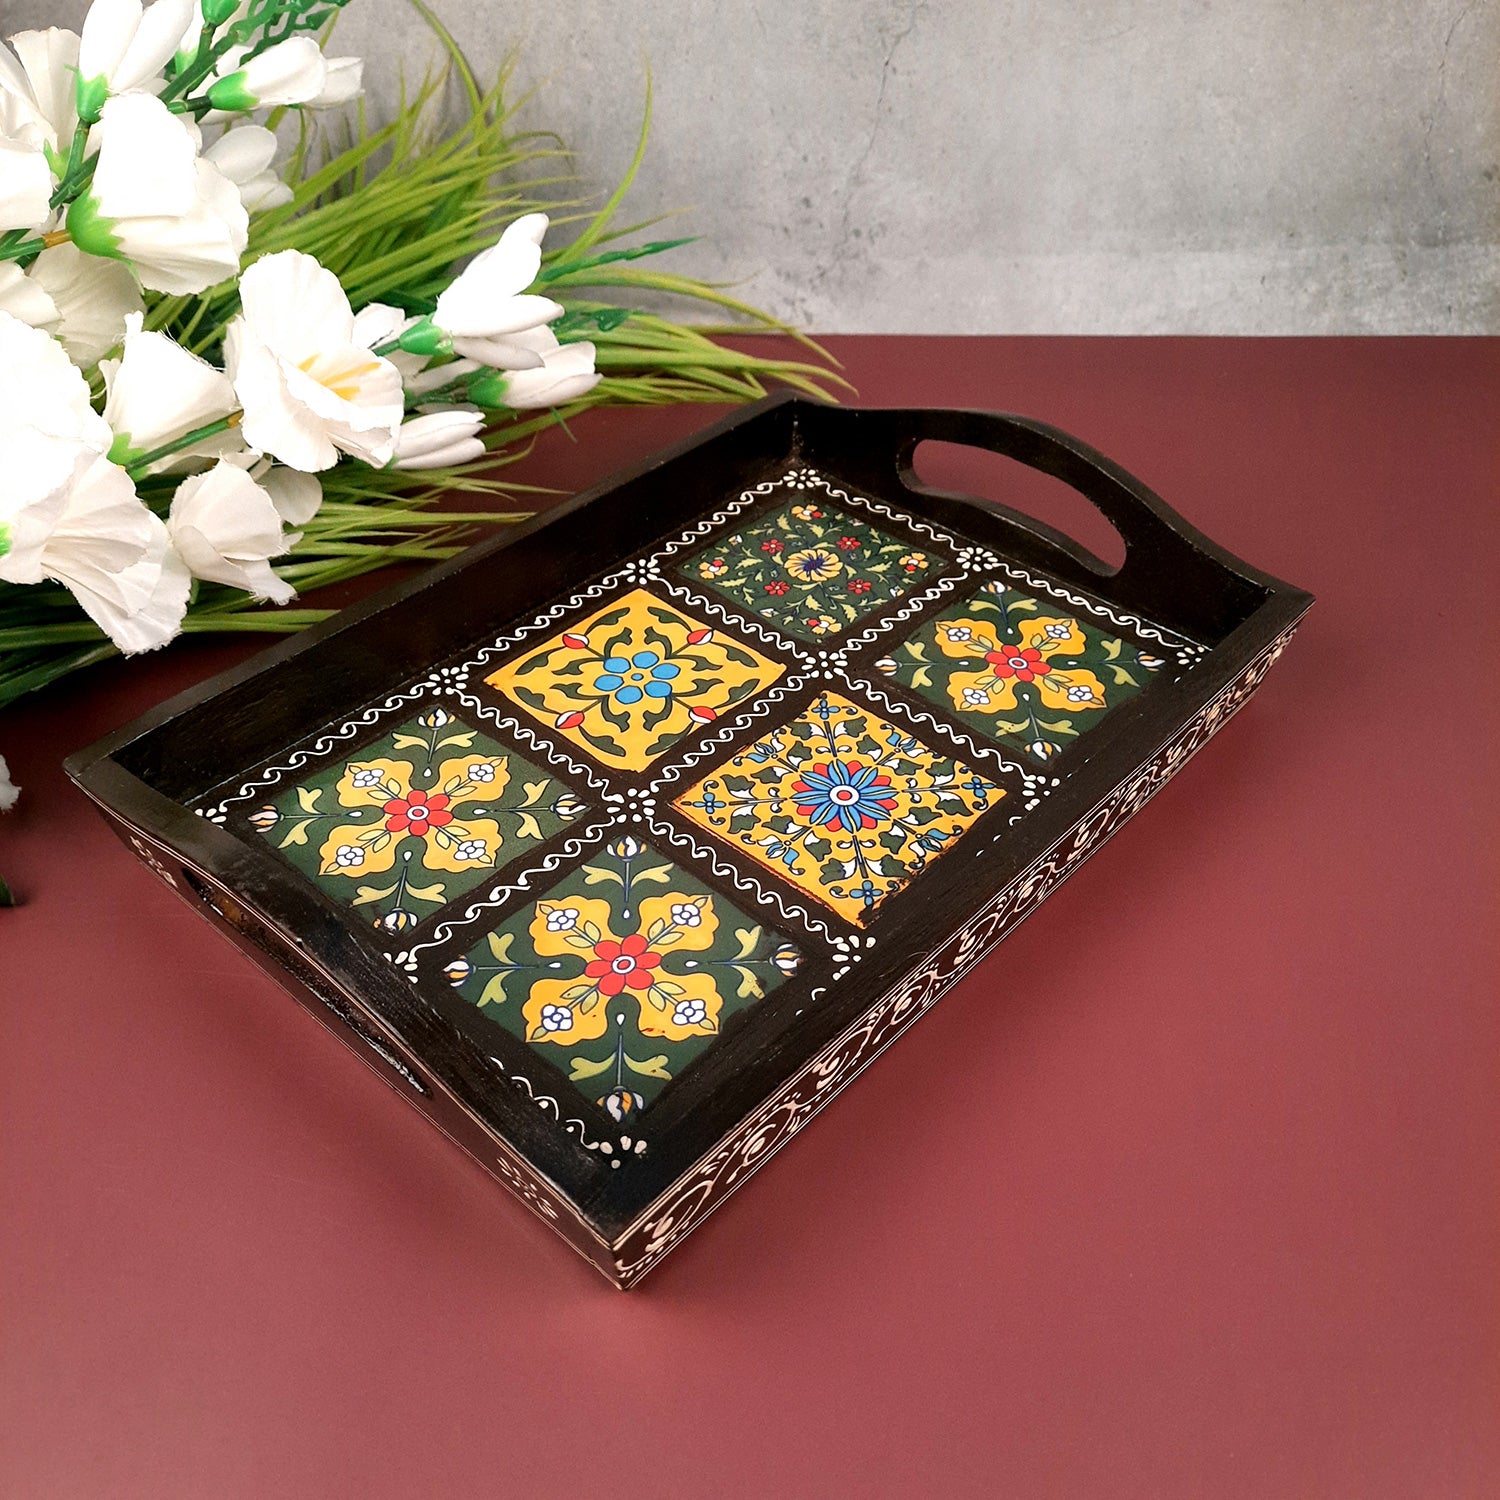 Serving Tray With In Built Ceramic Tiles | Tea & Snacks Serving Platter Wooden | Tray With Handles - for Home, Dining Table, Kitchen Decor, Restaurants, Office, Cafe & Gifts - 12 Inch - Apkamart